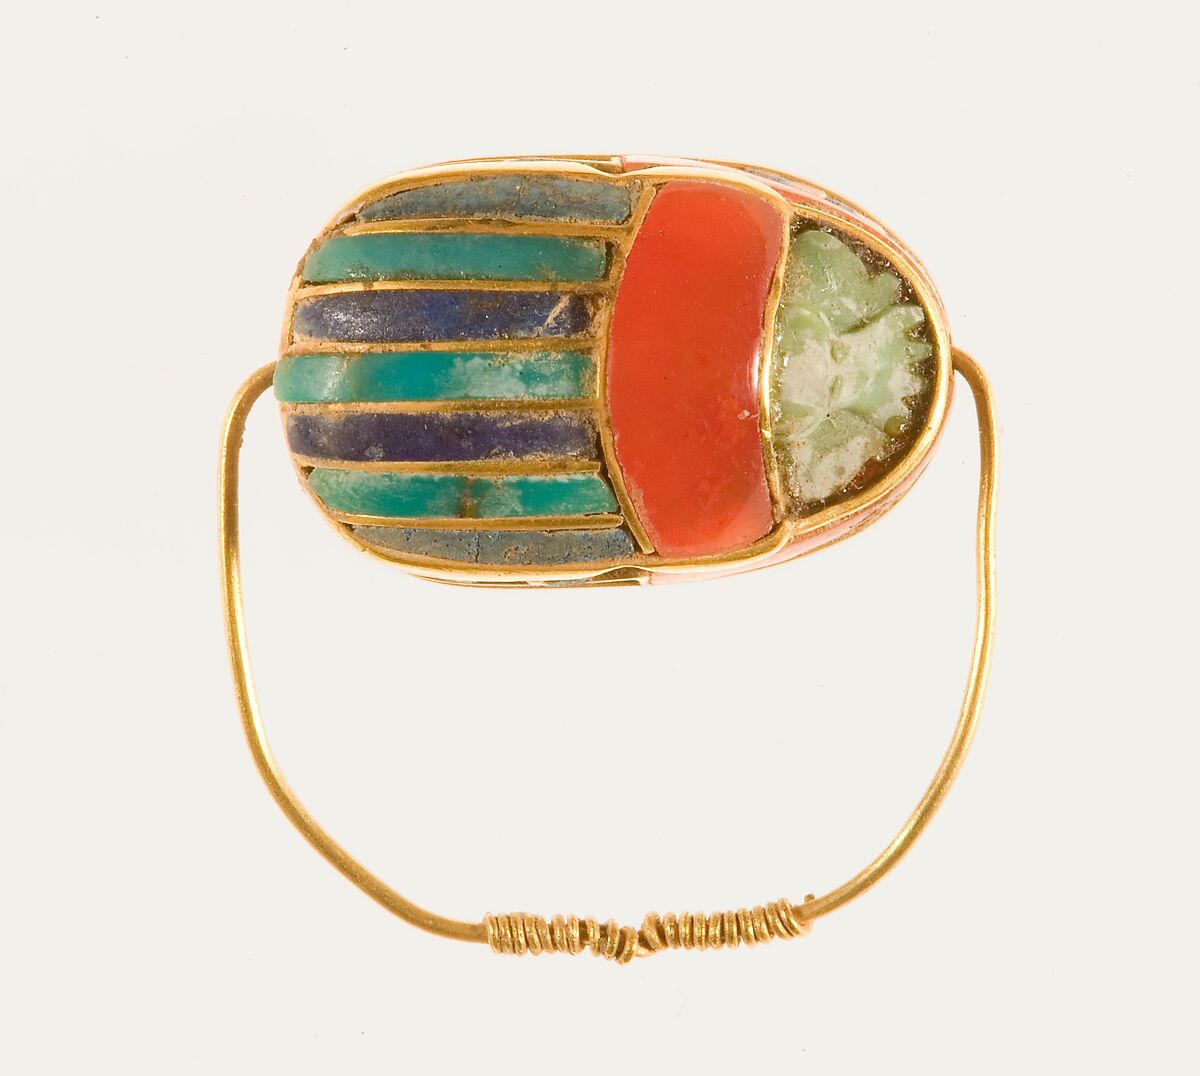 Scarab ring of Sithathoryunet, Gold, carnelian, lapis lazuli, and turquoise, bedding material 